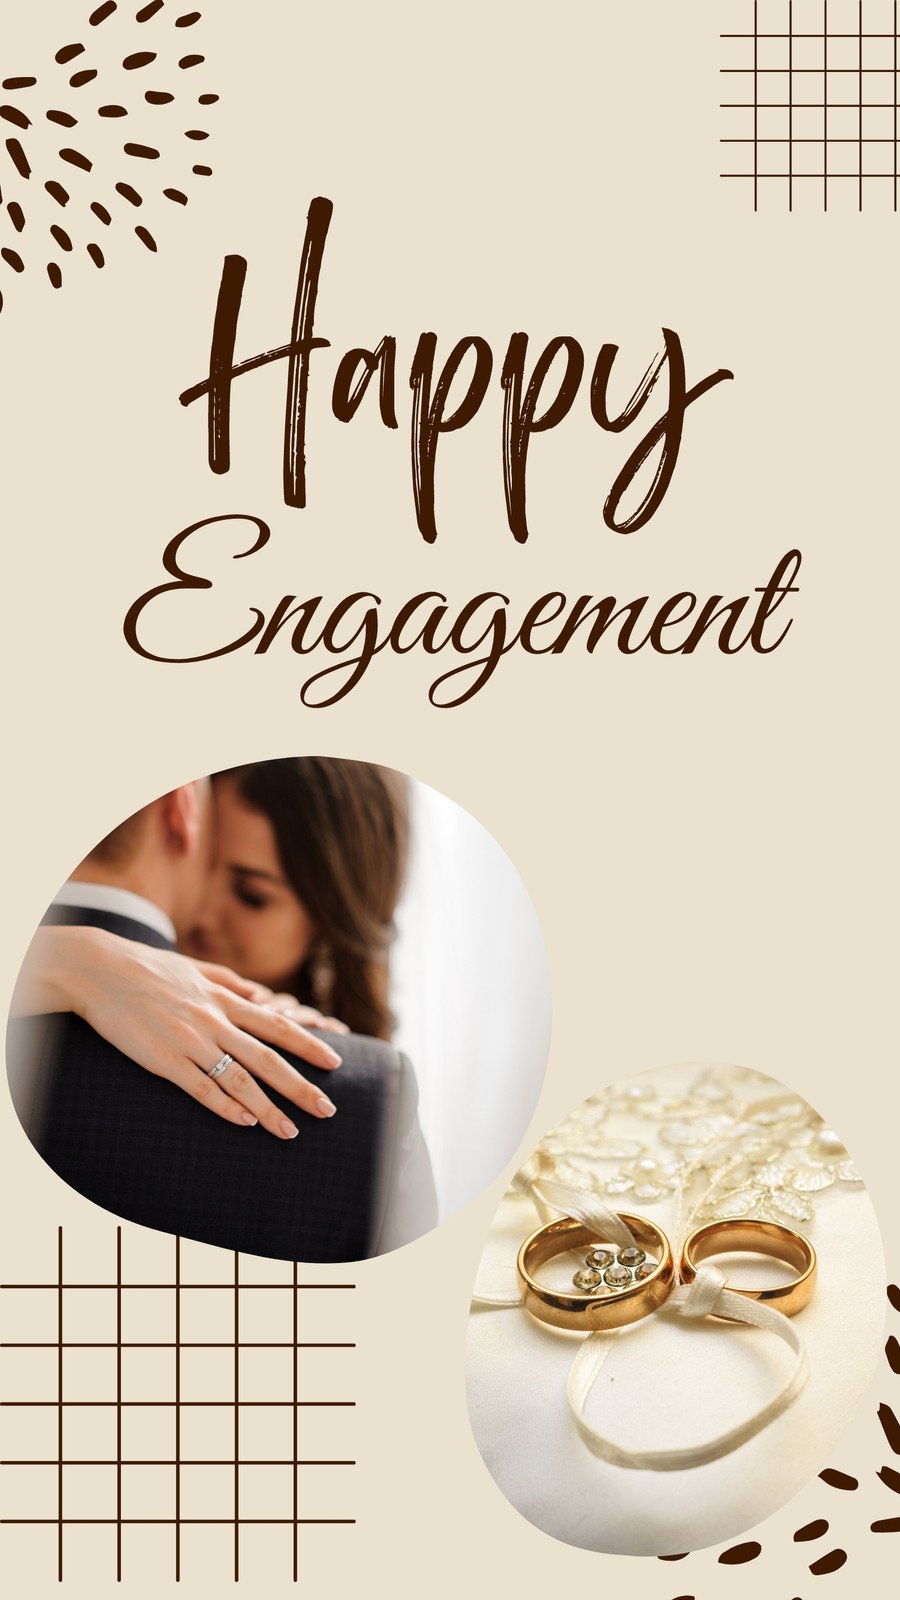 100 Engagement Quotes About True Love to Share - Parade